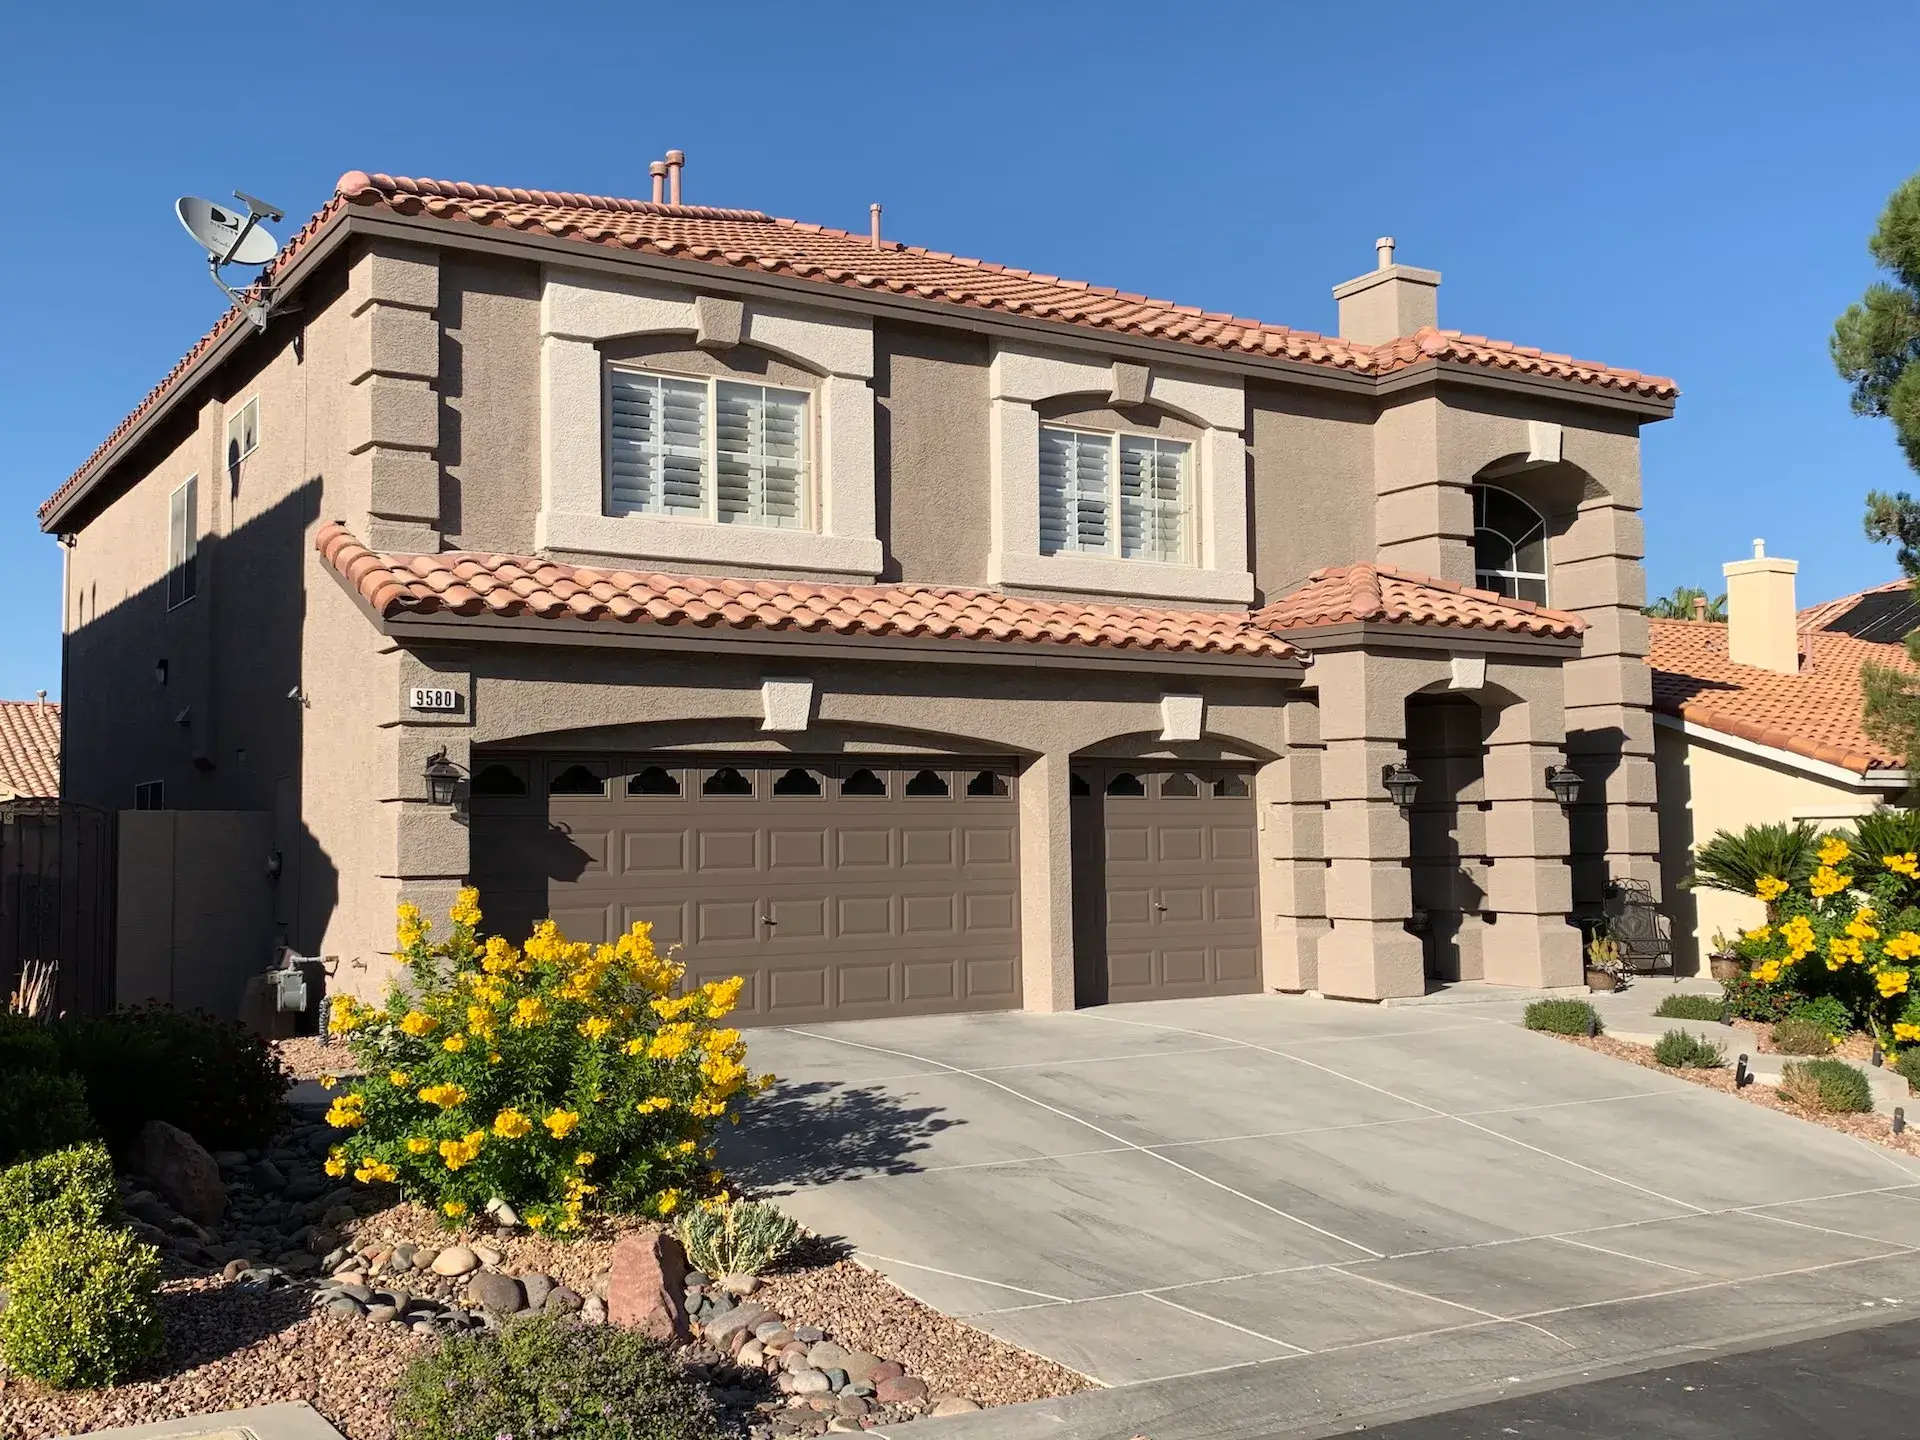 The view of the exterior of a newly painted house by Spray n coat in Summerlin South NV